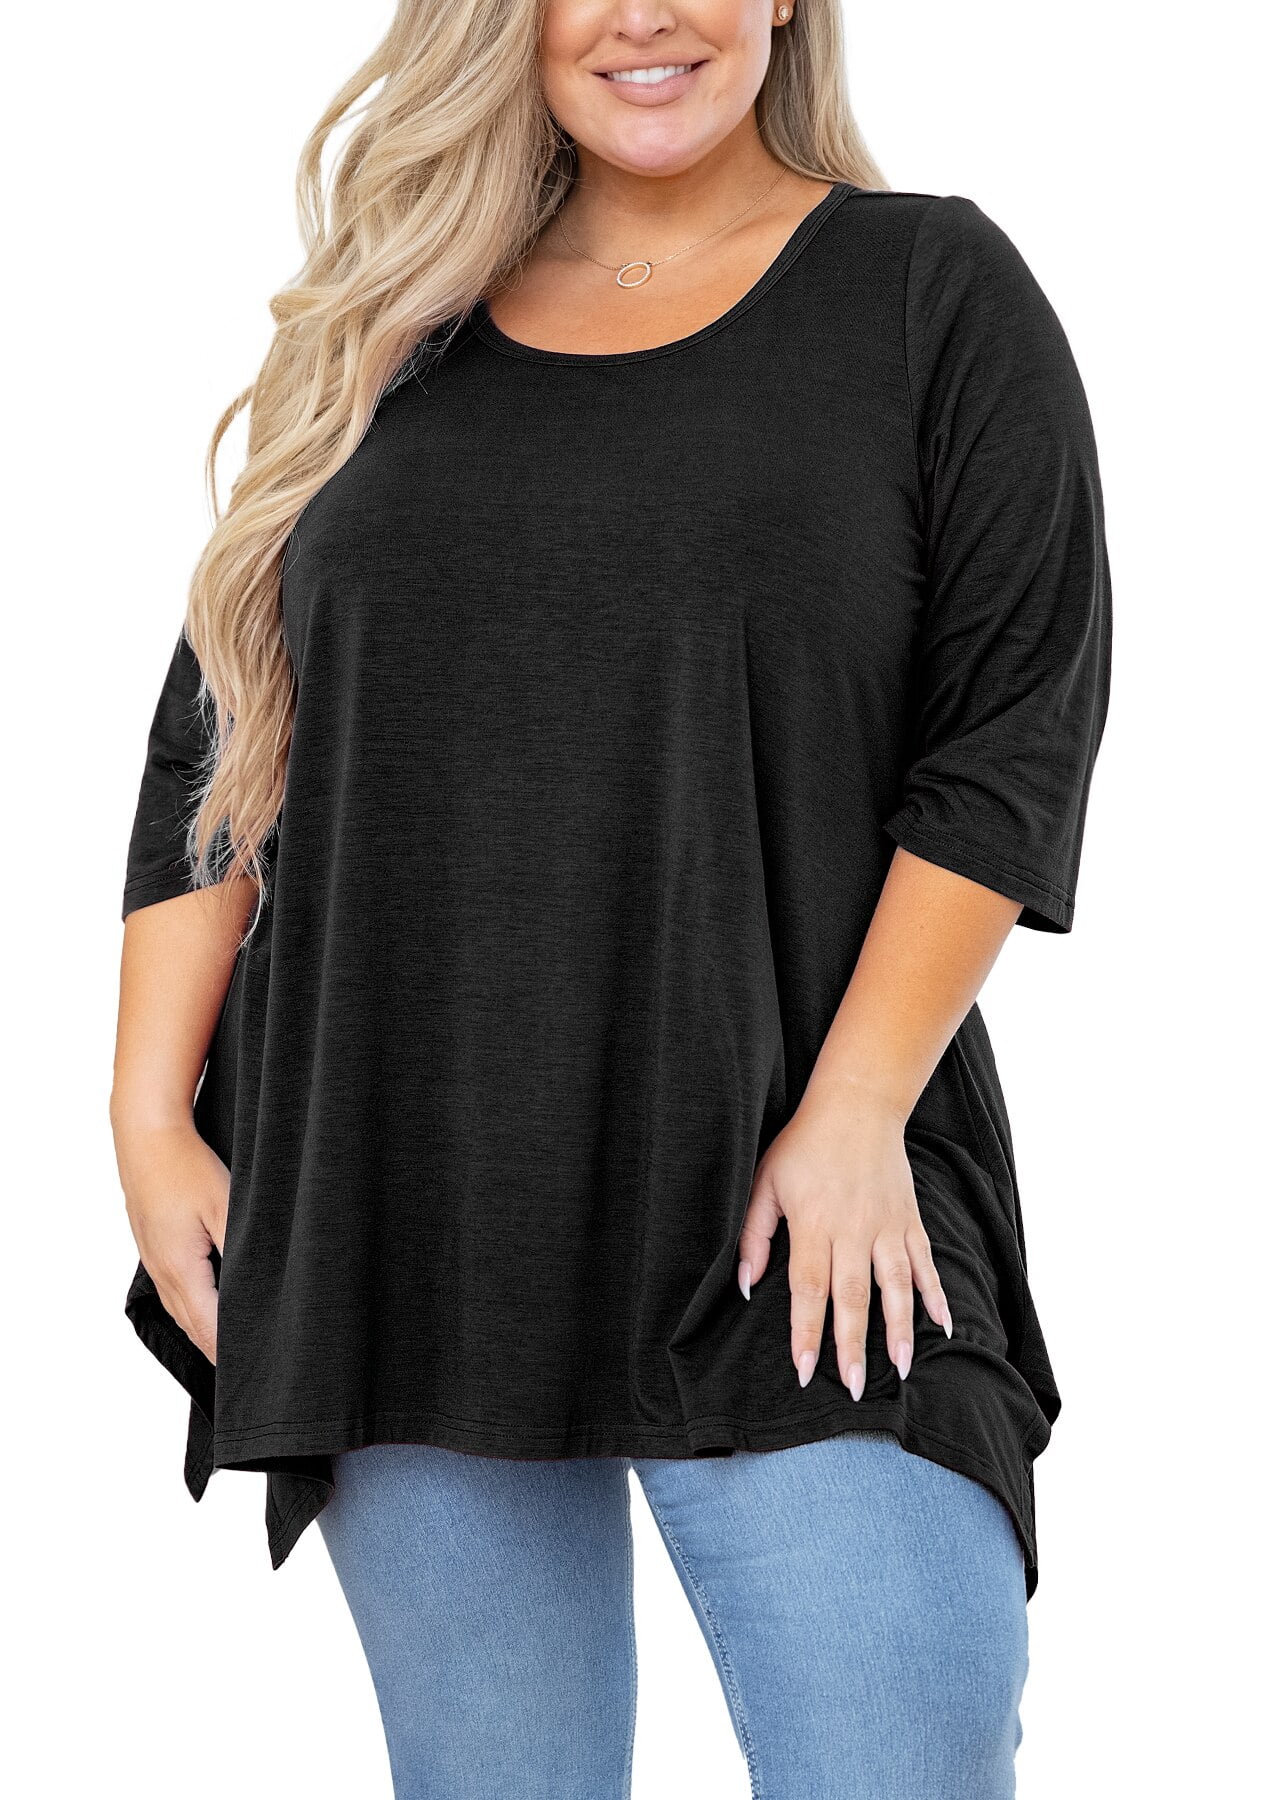 SHOWMALL Plus Size Tops for Women Tunic 3/4 Sleeve Clothes Black 3X Blouse  Swing Tunic Clothing Side Split Crewneck Flowy Shirt for Leggings 